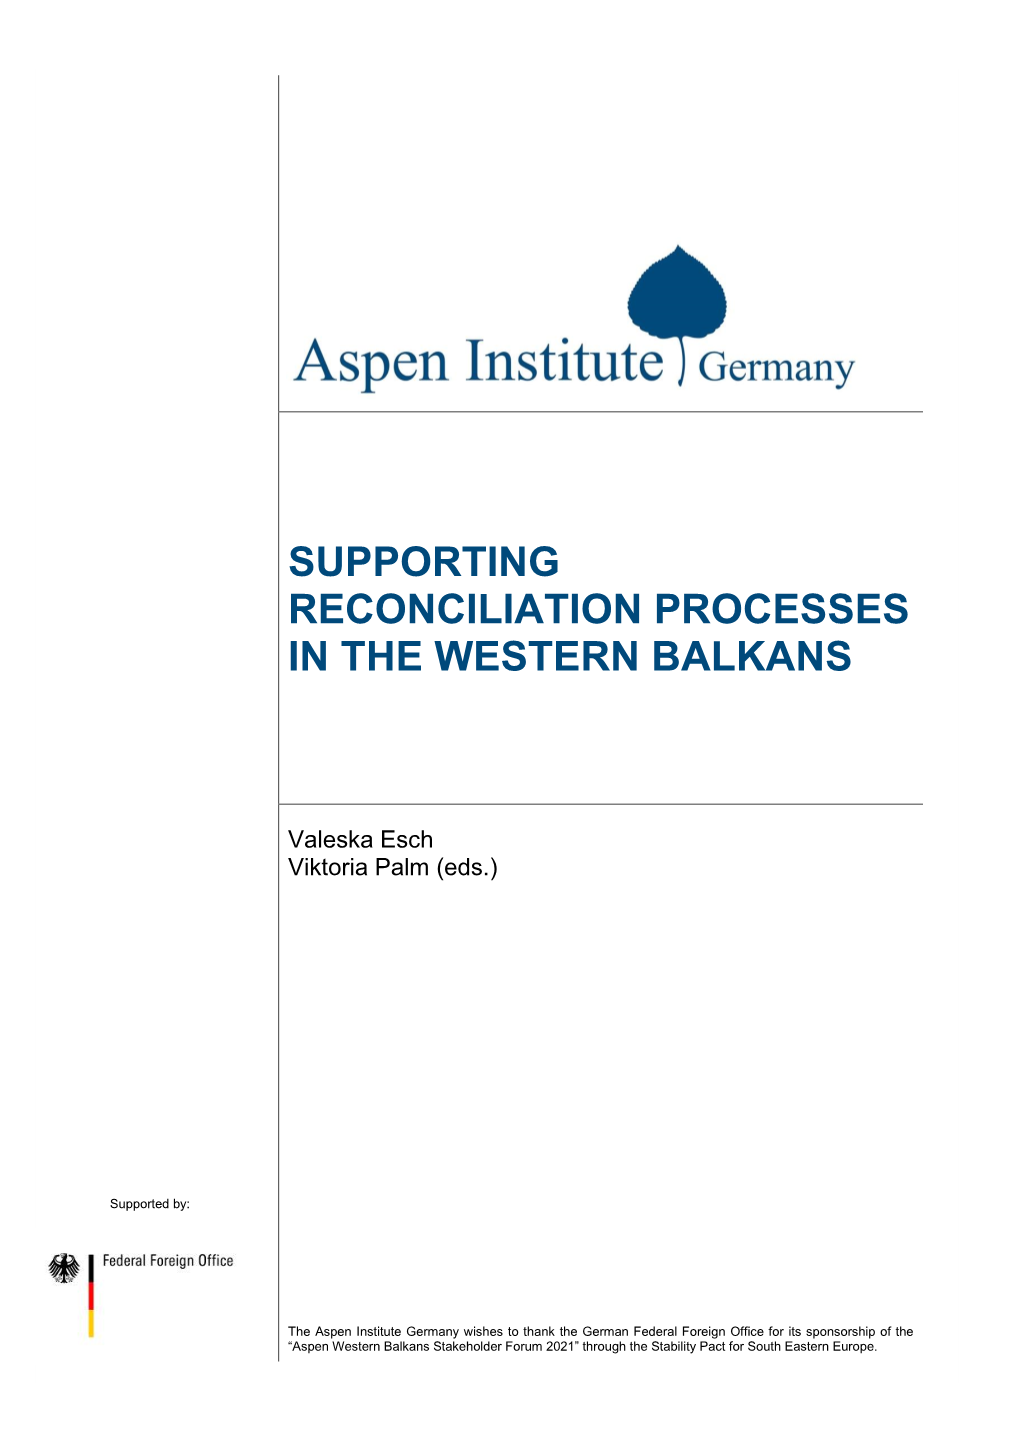 Supporting Reconciliation Processes in the Western Balkans (2021)